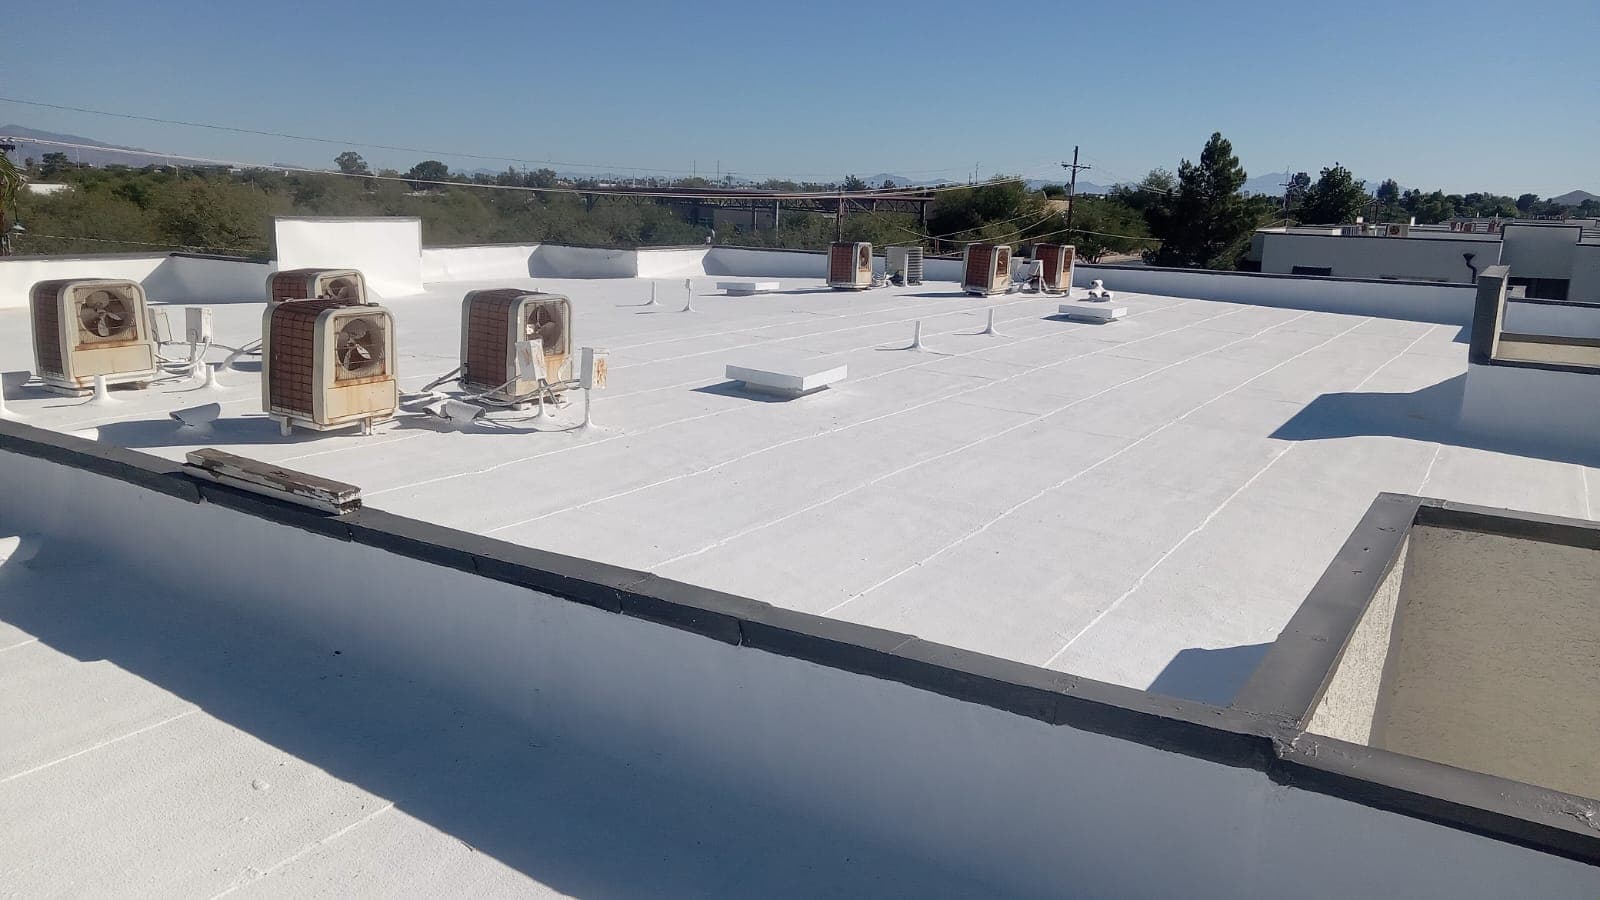 A spacious flat roof in Flagstaff with a fresh foam recoating, set against the serene Fountain Hills landscape, exemplifying roofing excellence.